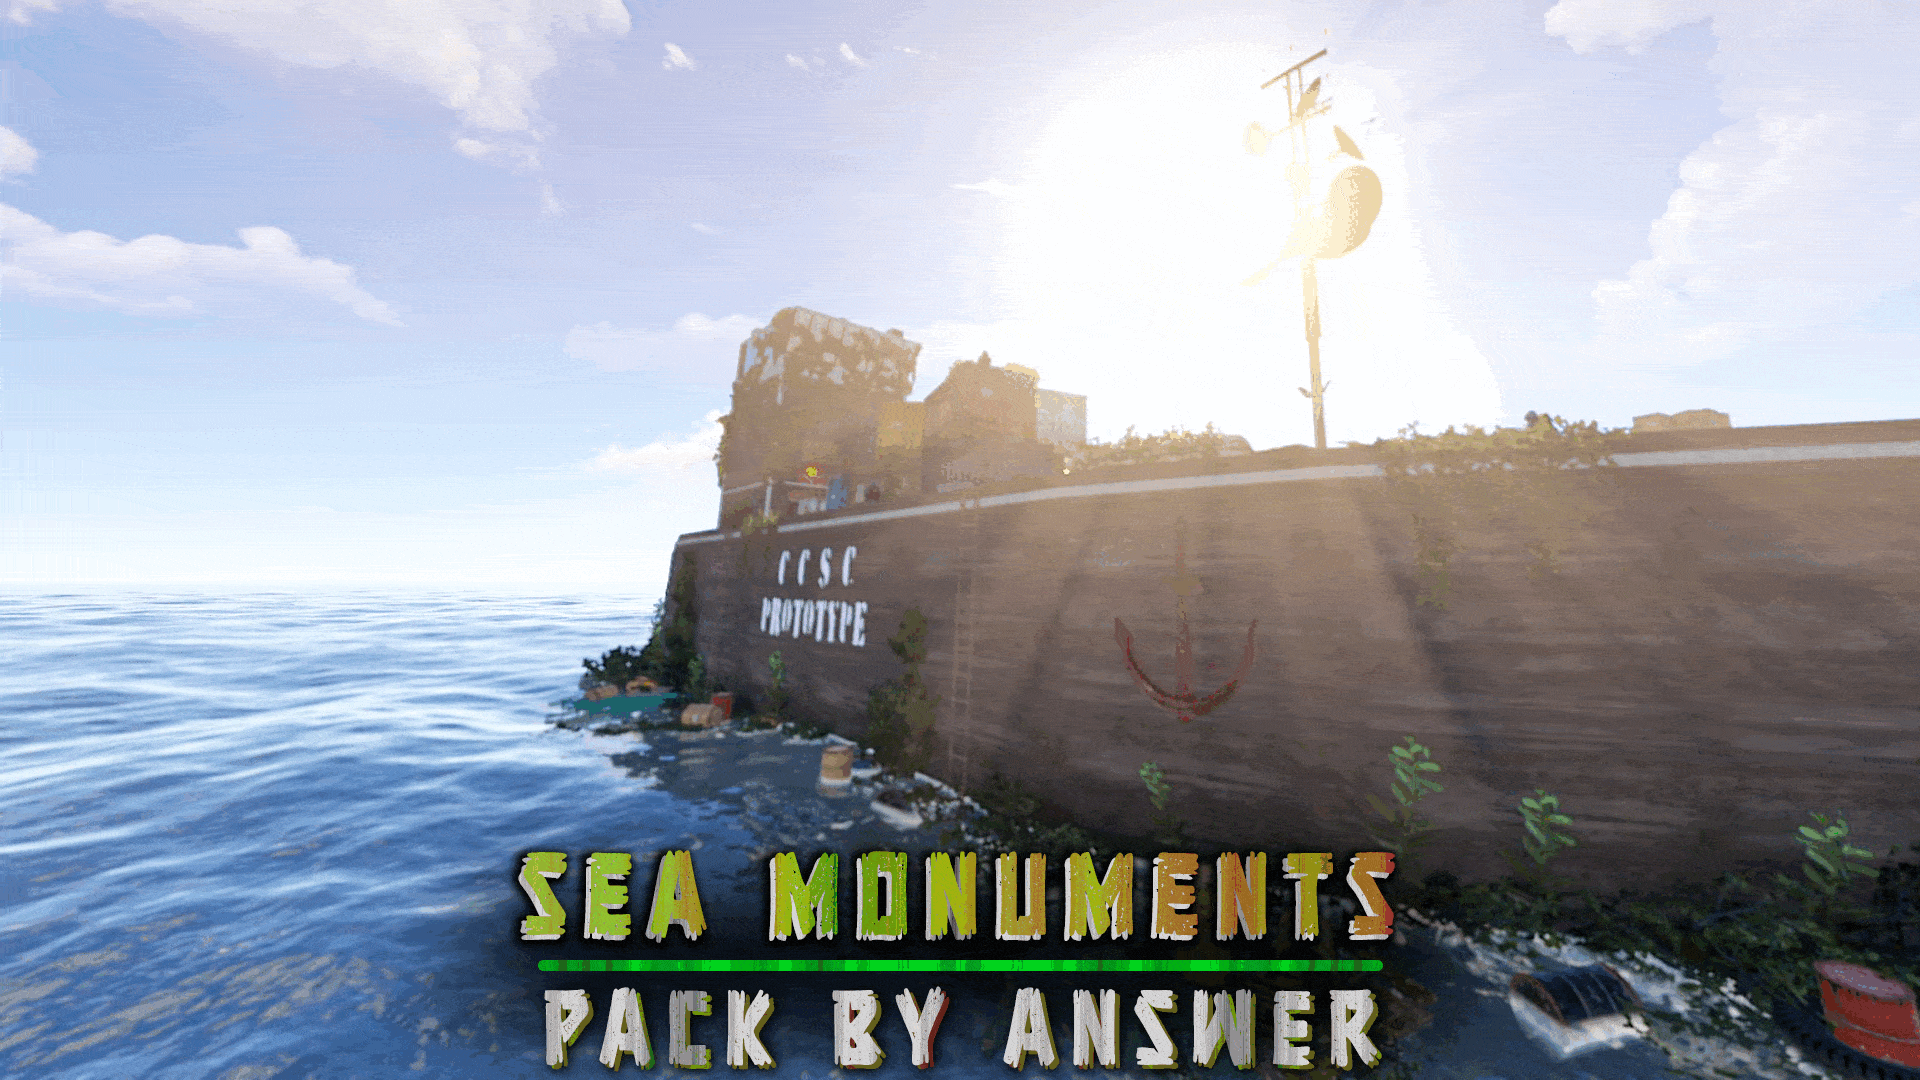 More information about "Sea Monuments (5 Pack)"